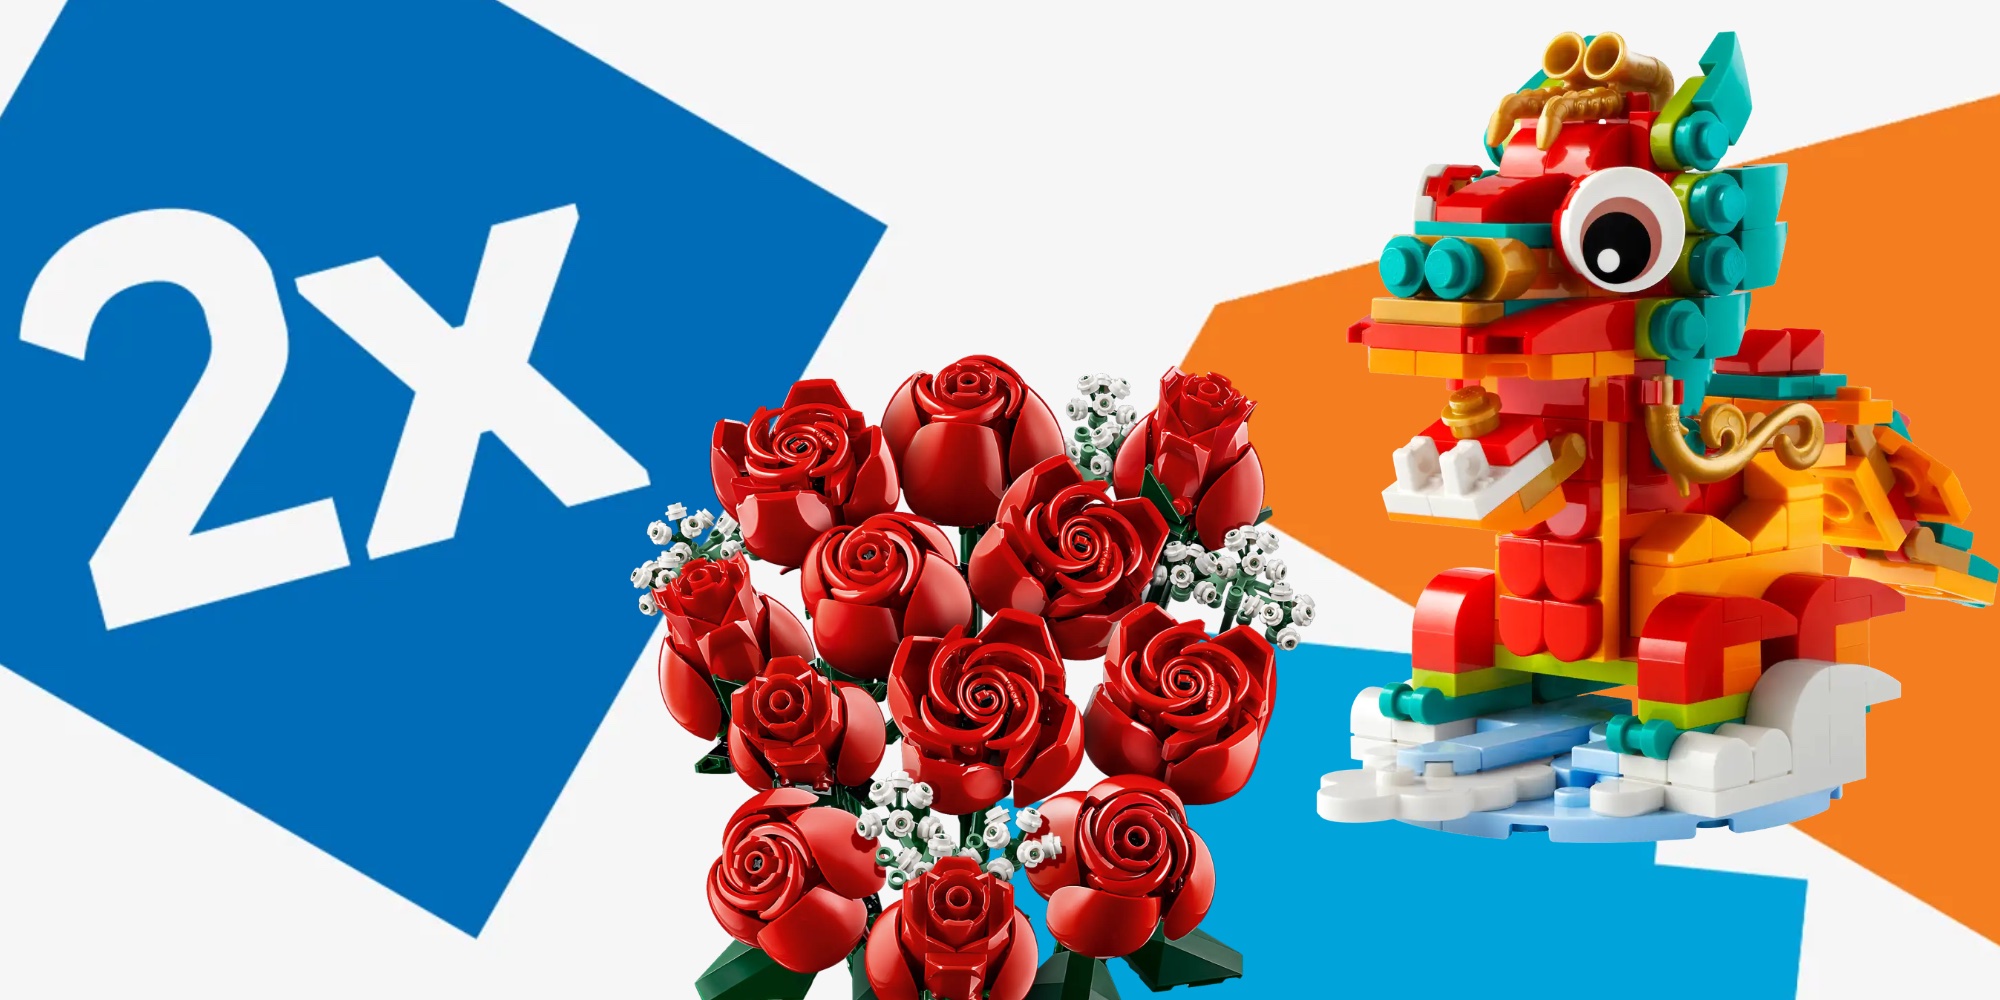 LEGO double points weekend goes live for Insiders members